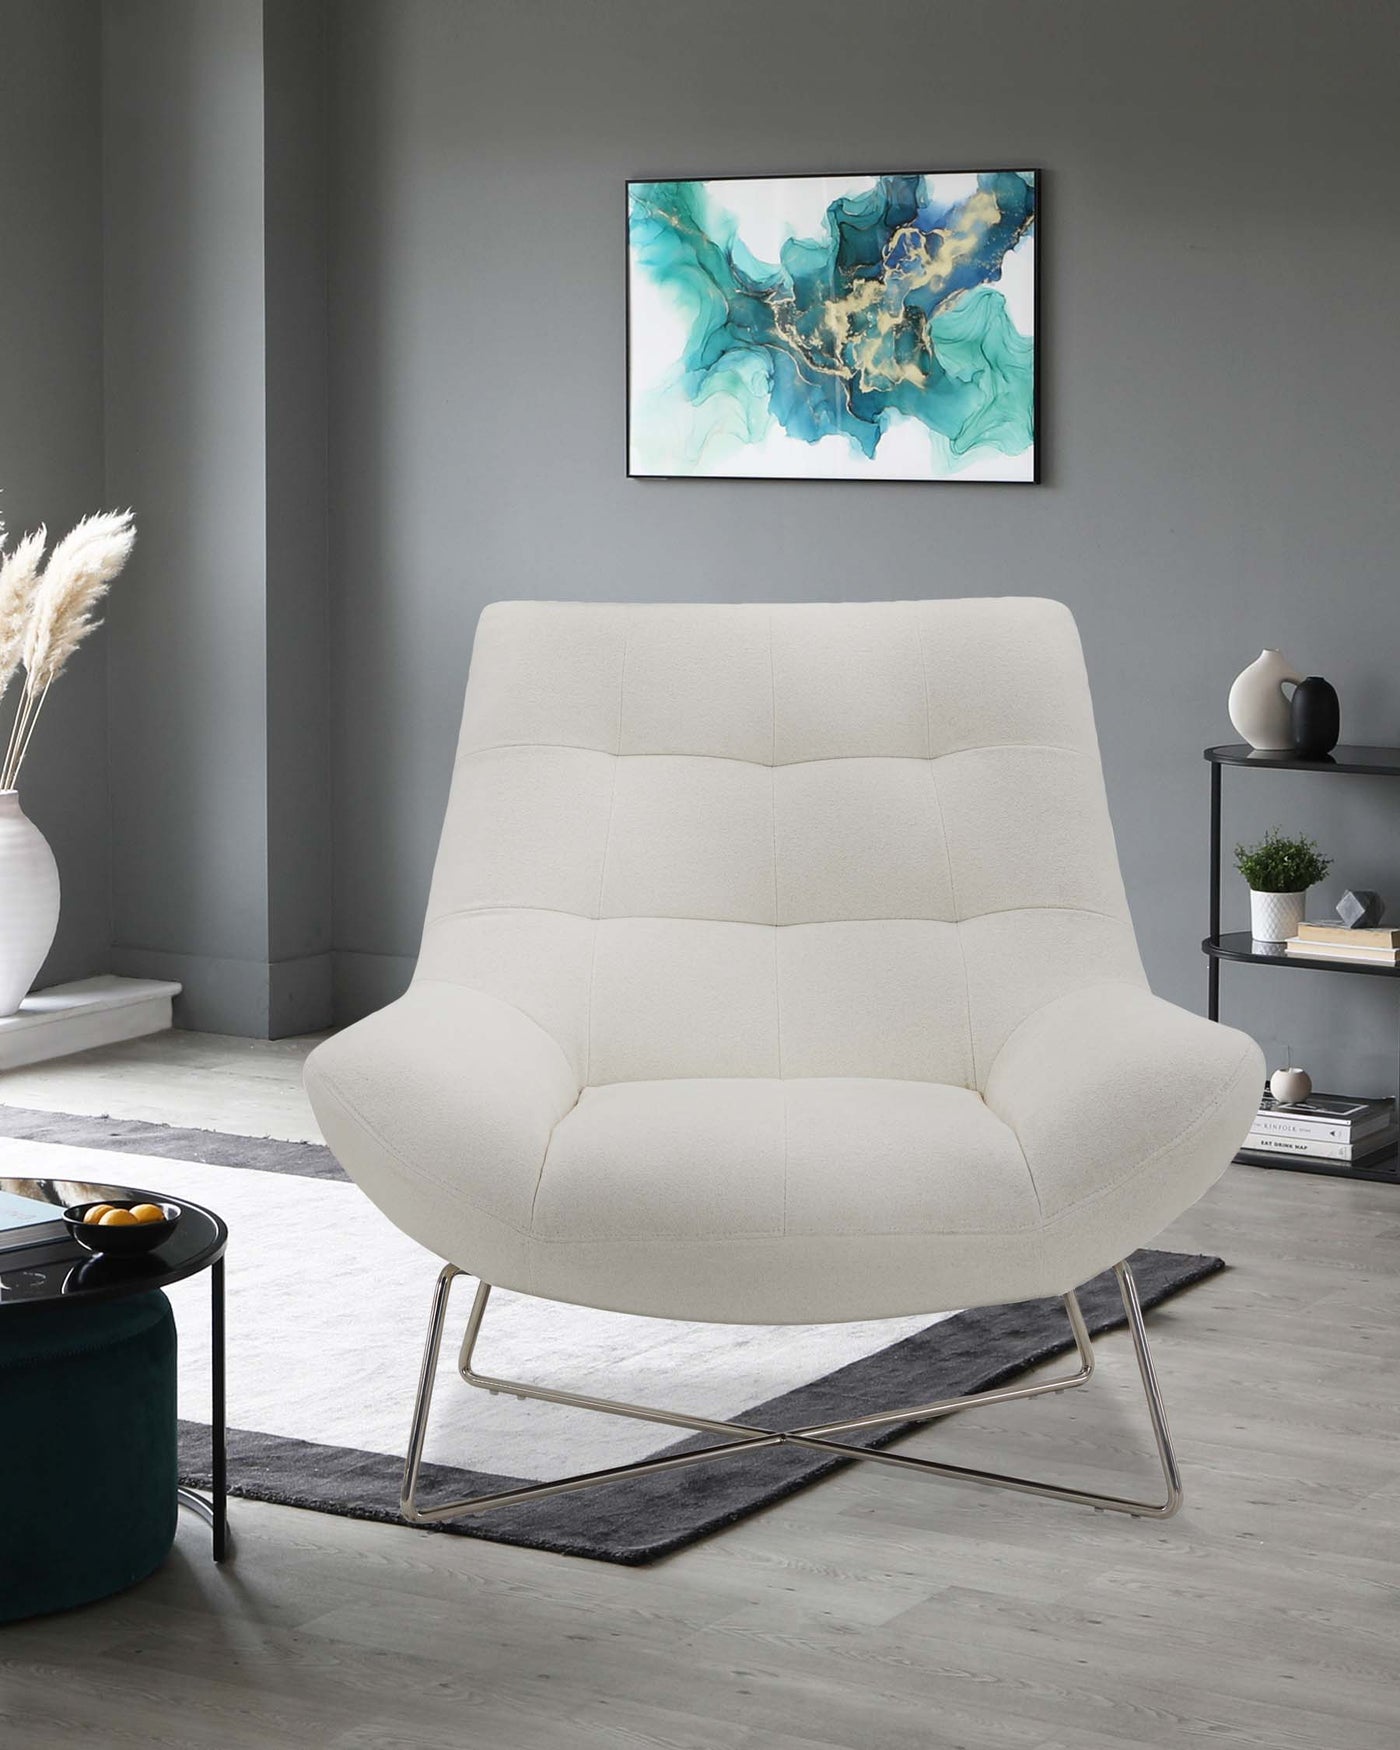 Modern cream-colored upholstered armchair with a tufted backrest and a unique metal base in a sleek, contemporary living room setting.